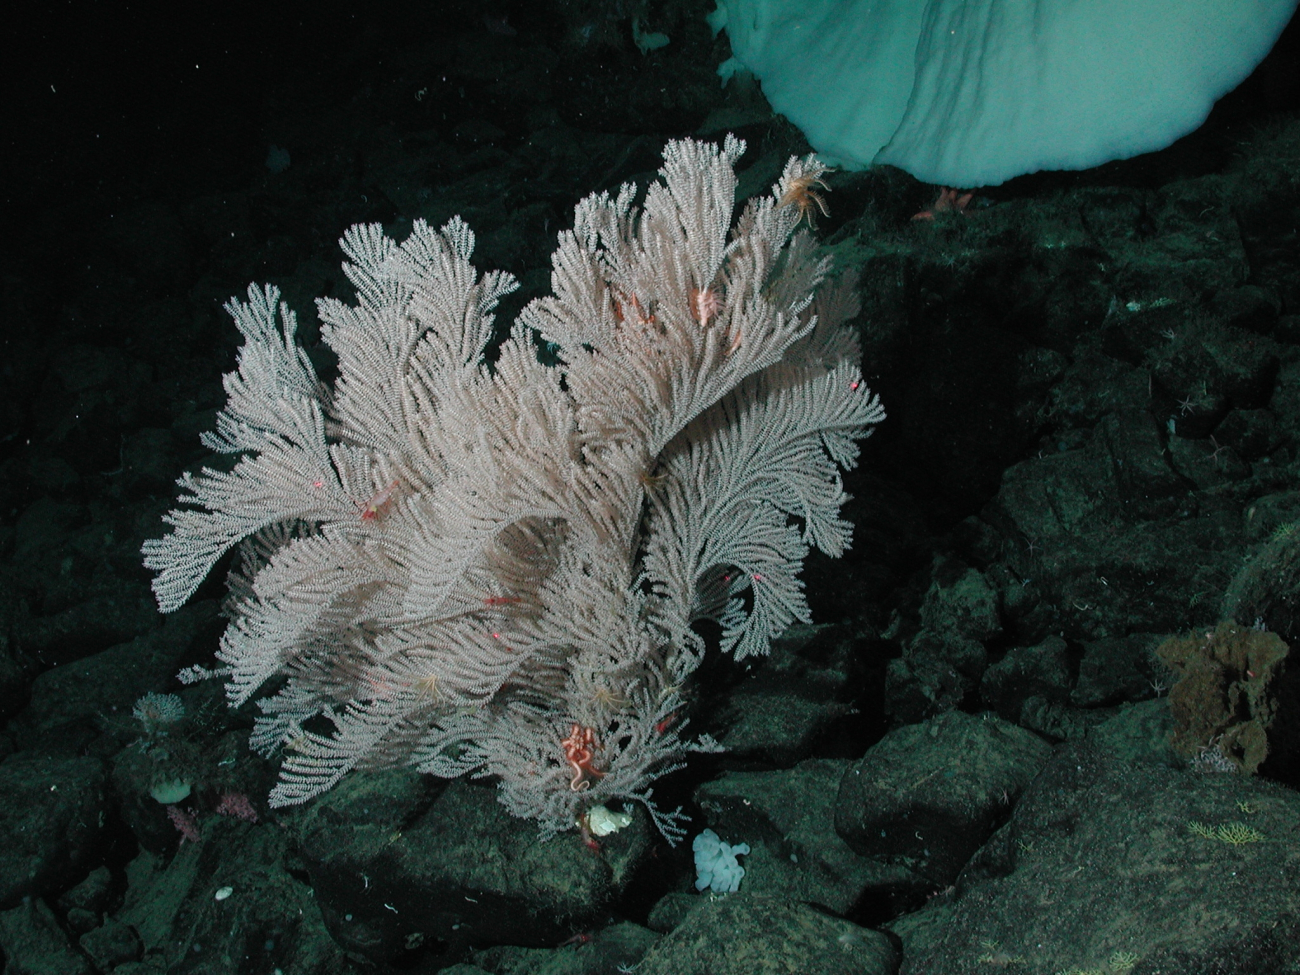 Big White coral (Family Primnoidae) and brittle star (Asteronyx sp) at 1570meters water depth